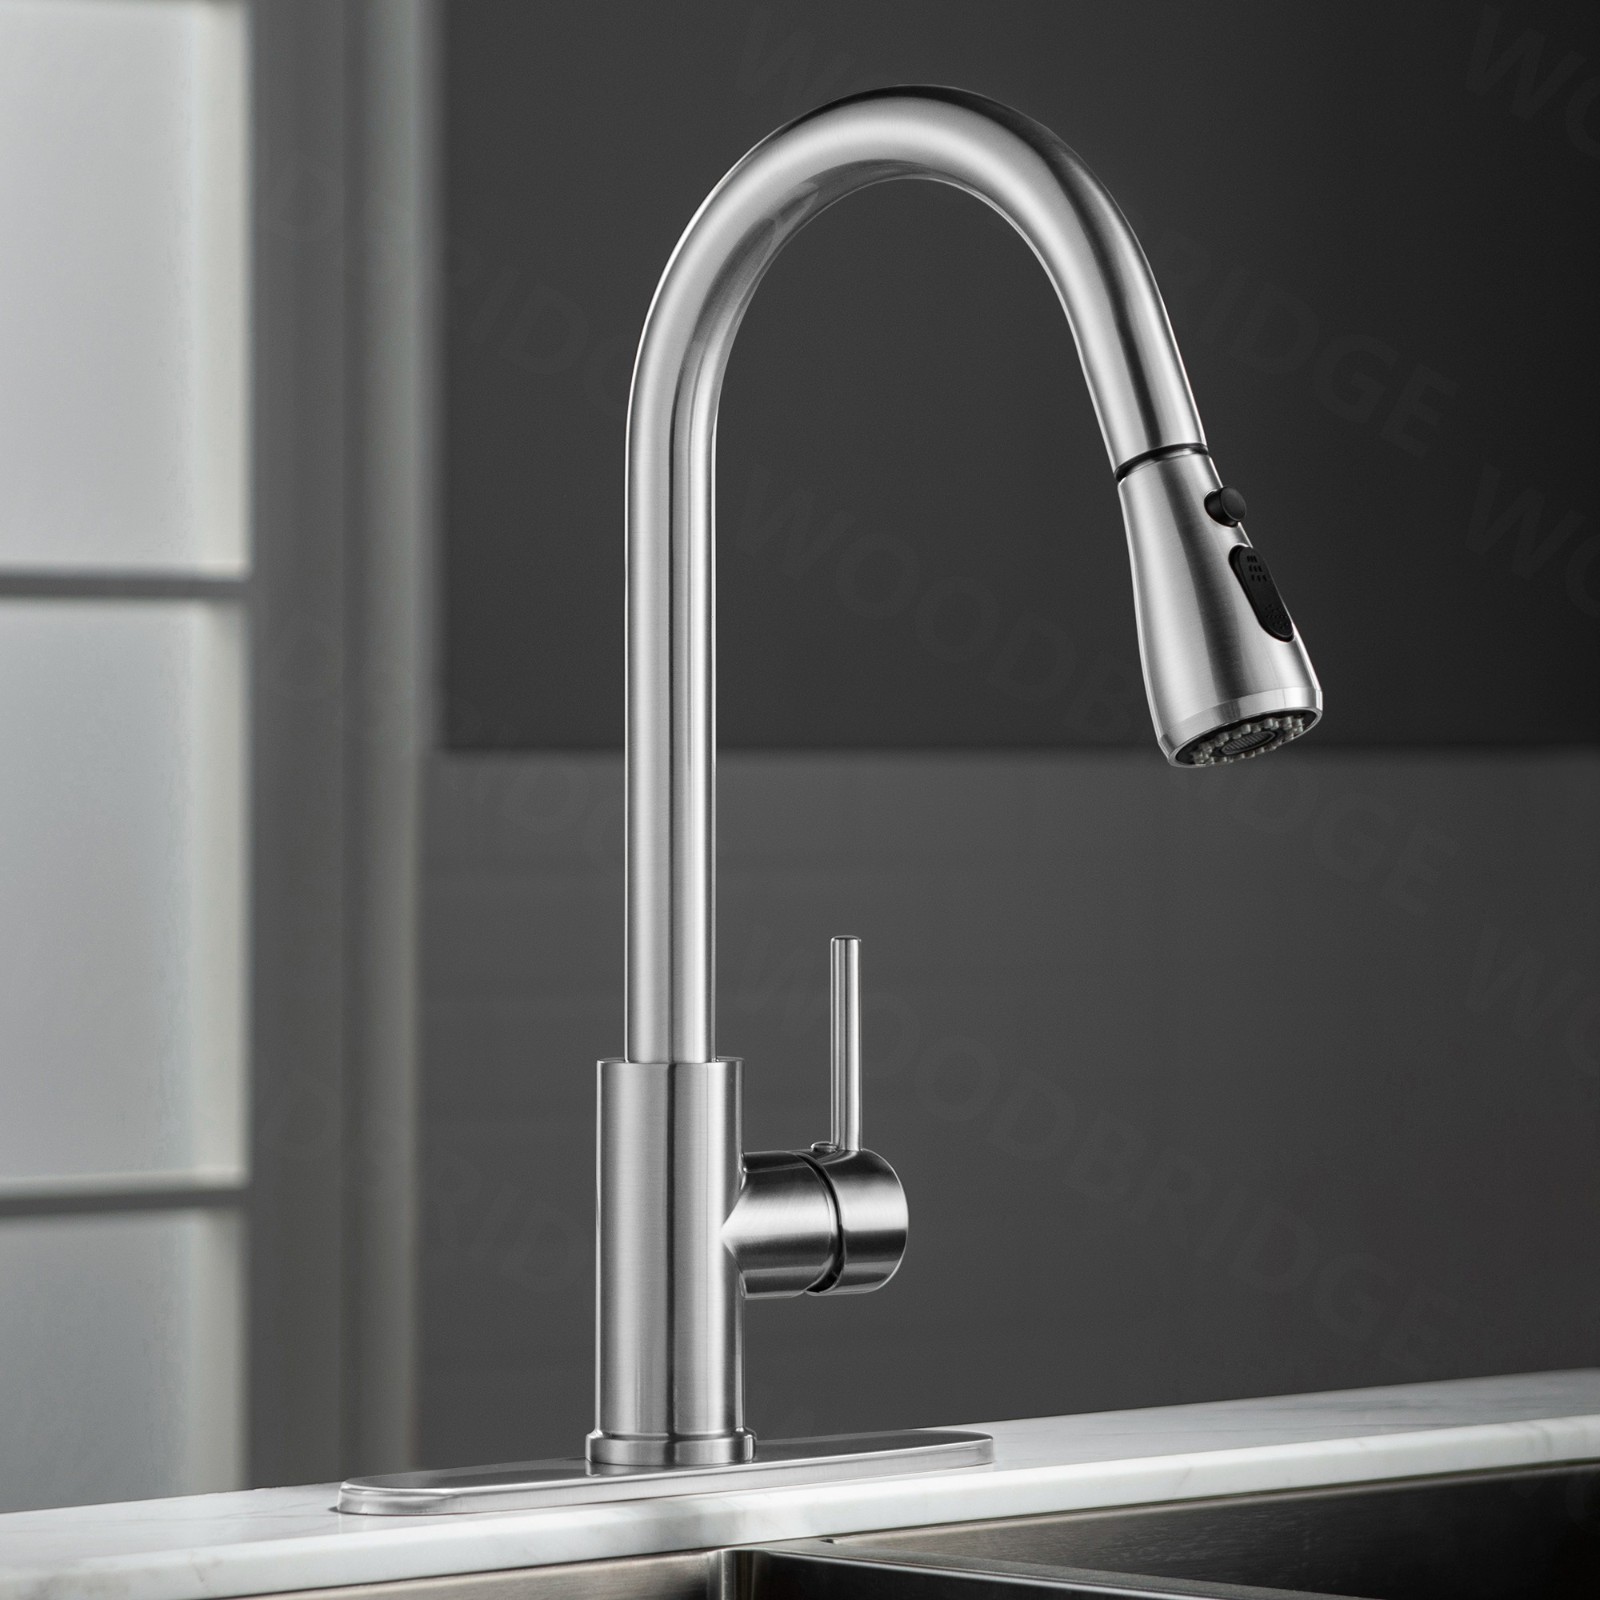  WOODBRIDGE WK090802CH Single Handle Pull Down Kitchen Faucet in Polished Chrome Finish._5027